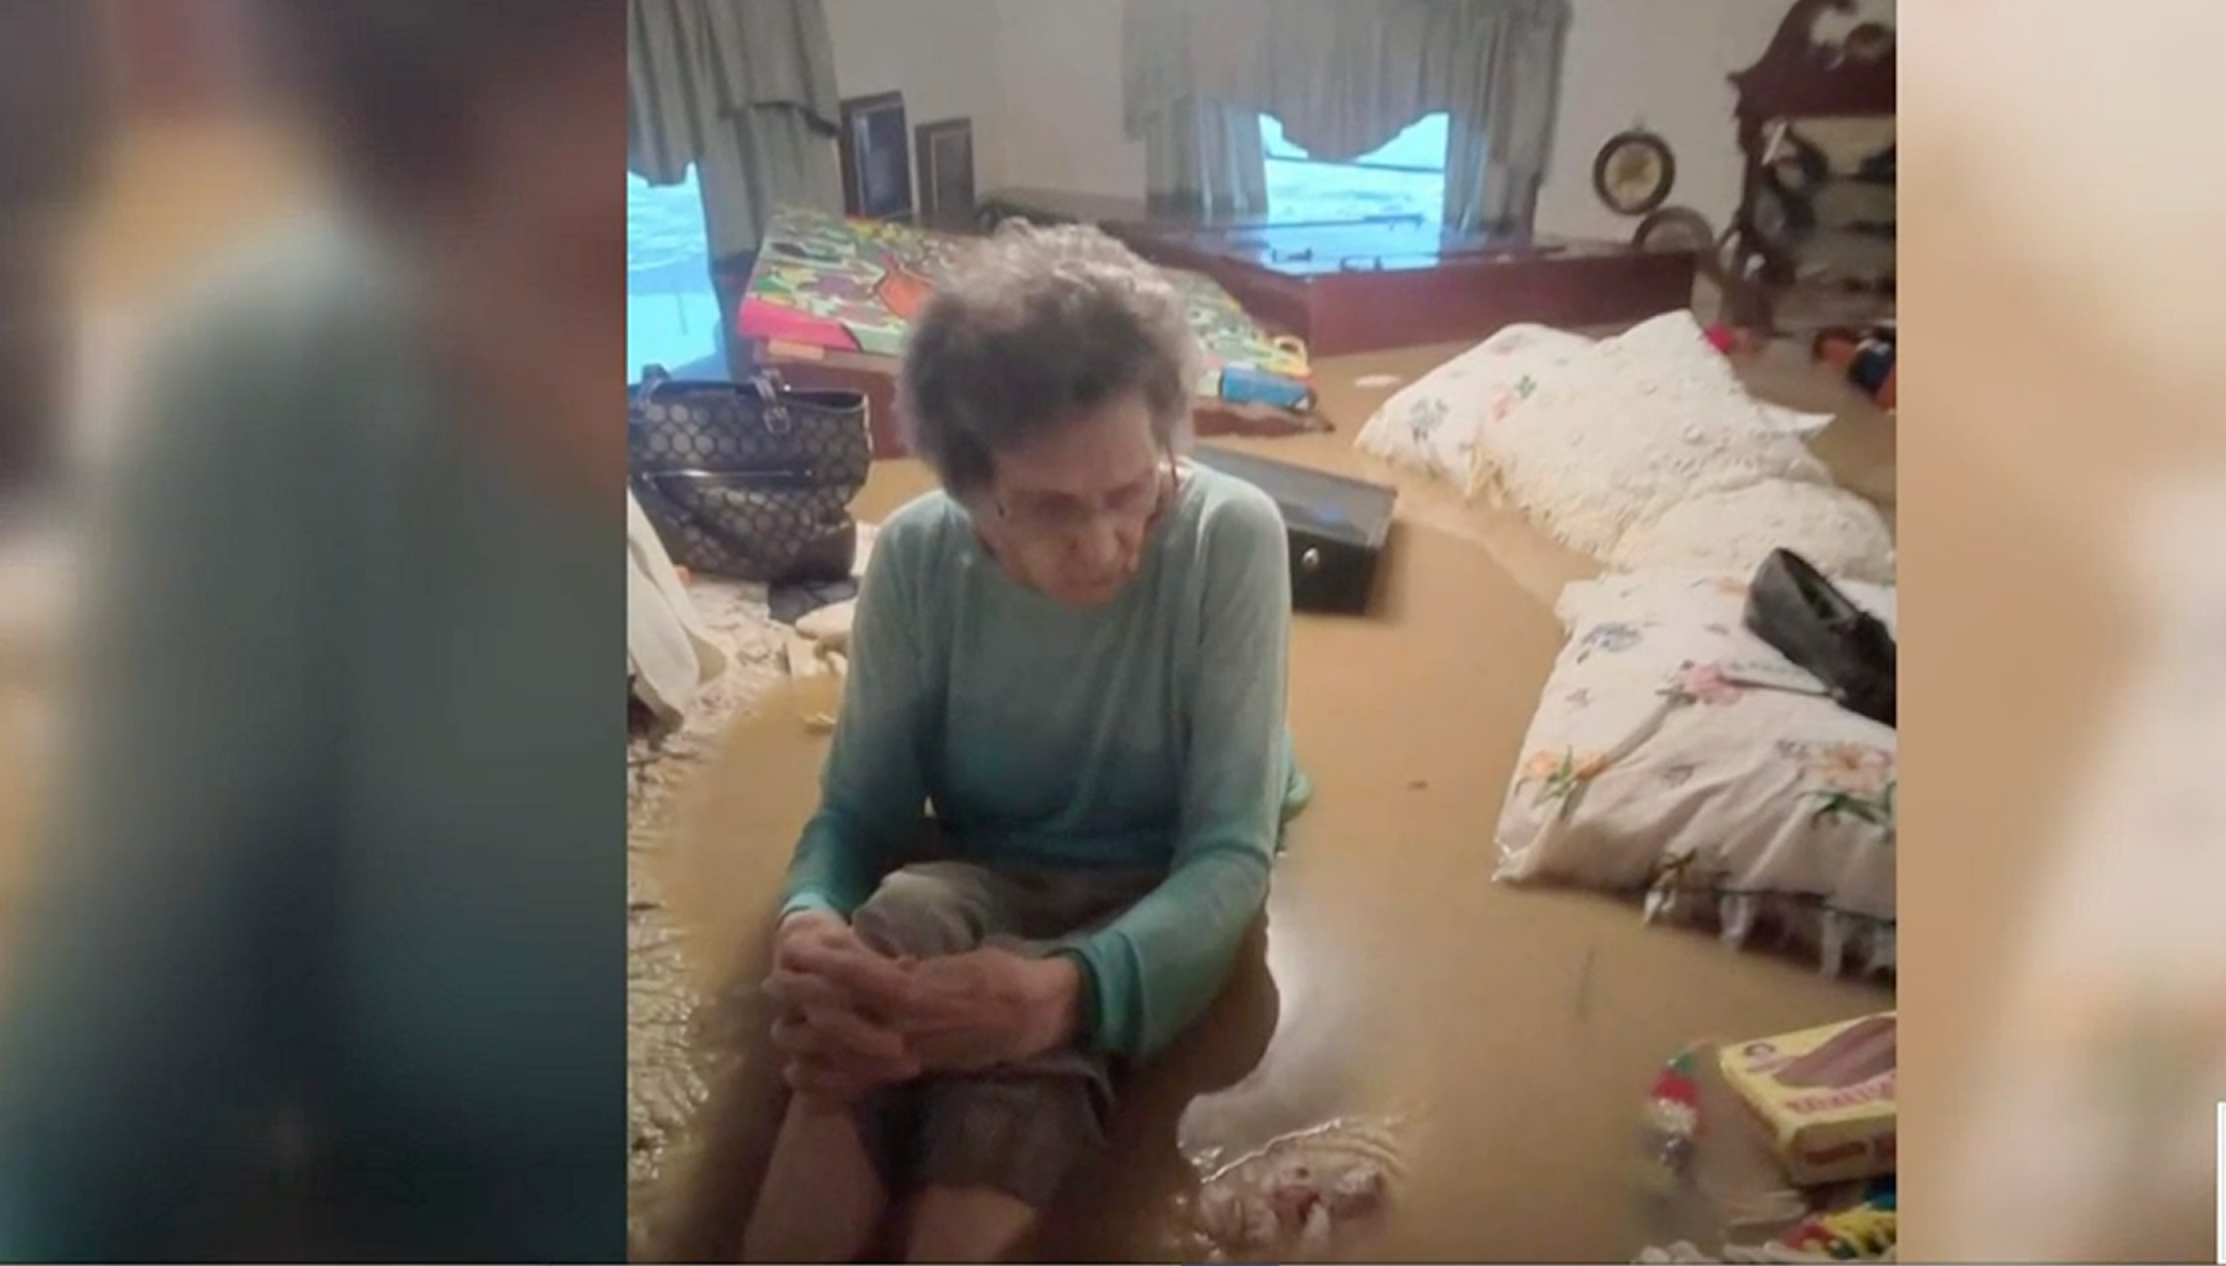 Mae Amburgey, who survived this summer’s floods in eastern Kentucky, passed away this month